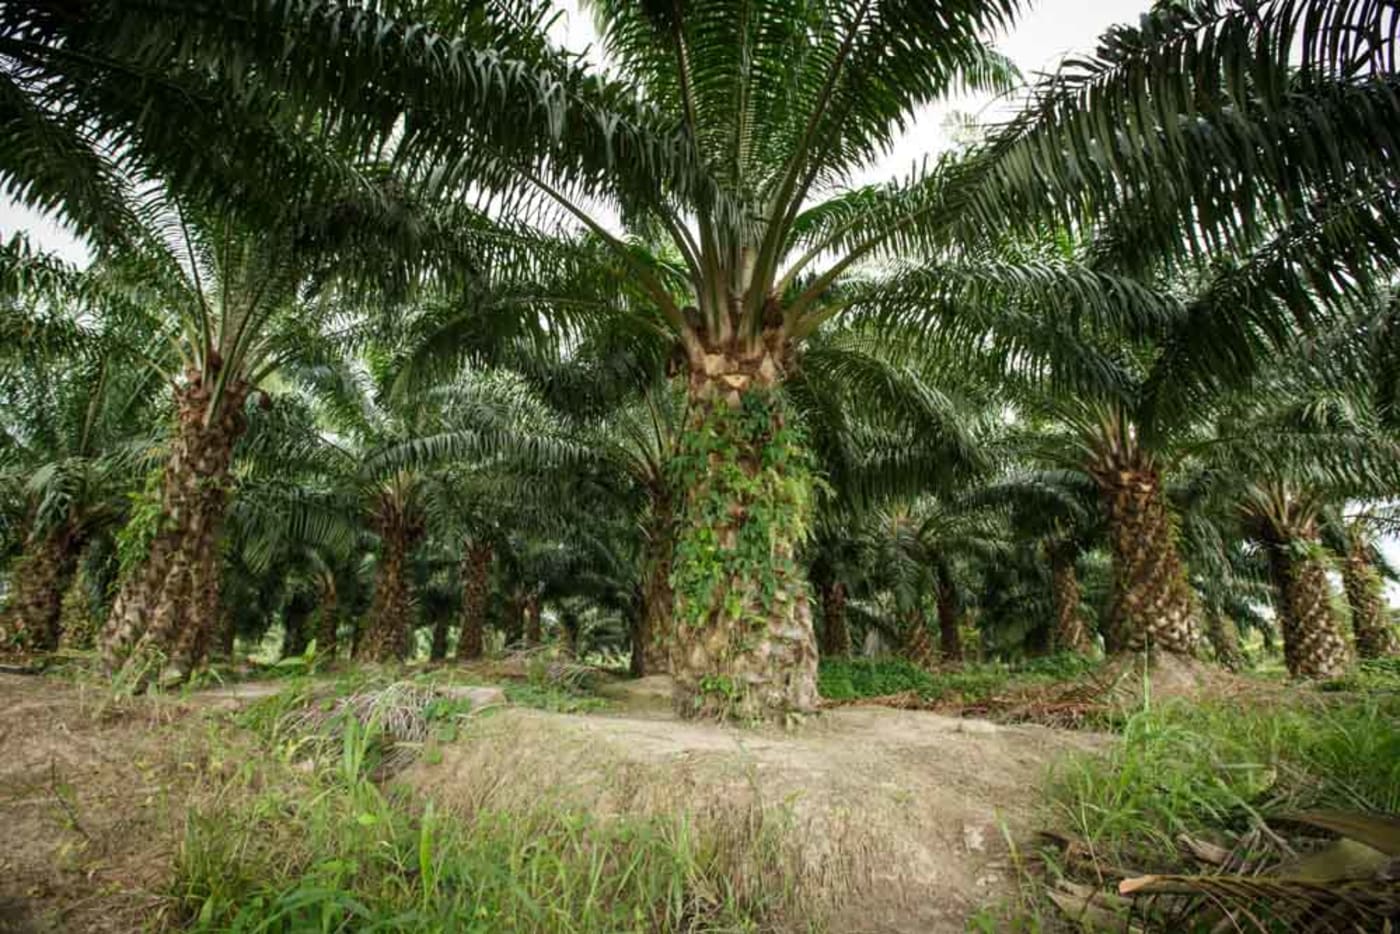 Agrocaribe plantation awarded the Roundtable on Sustainable Palm Oil (RSPO) certificat, Guatemala